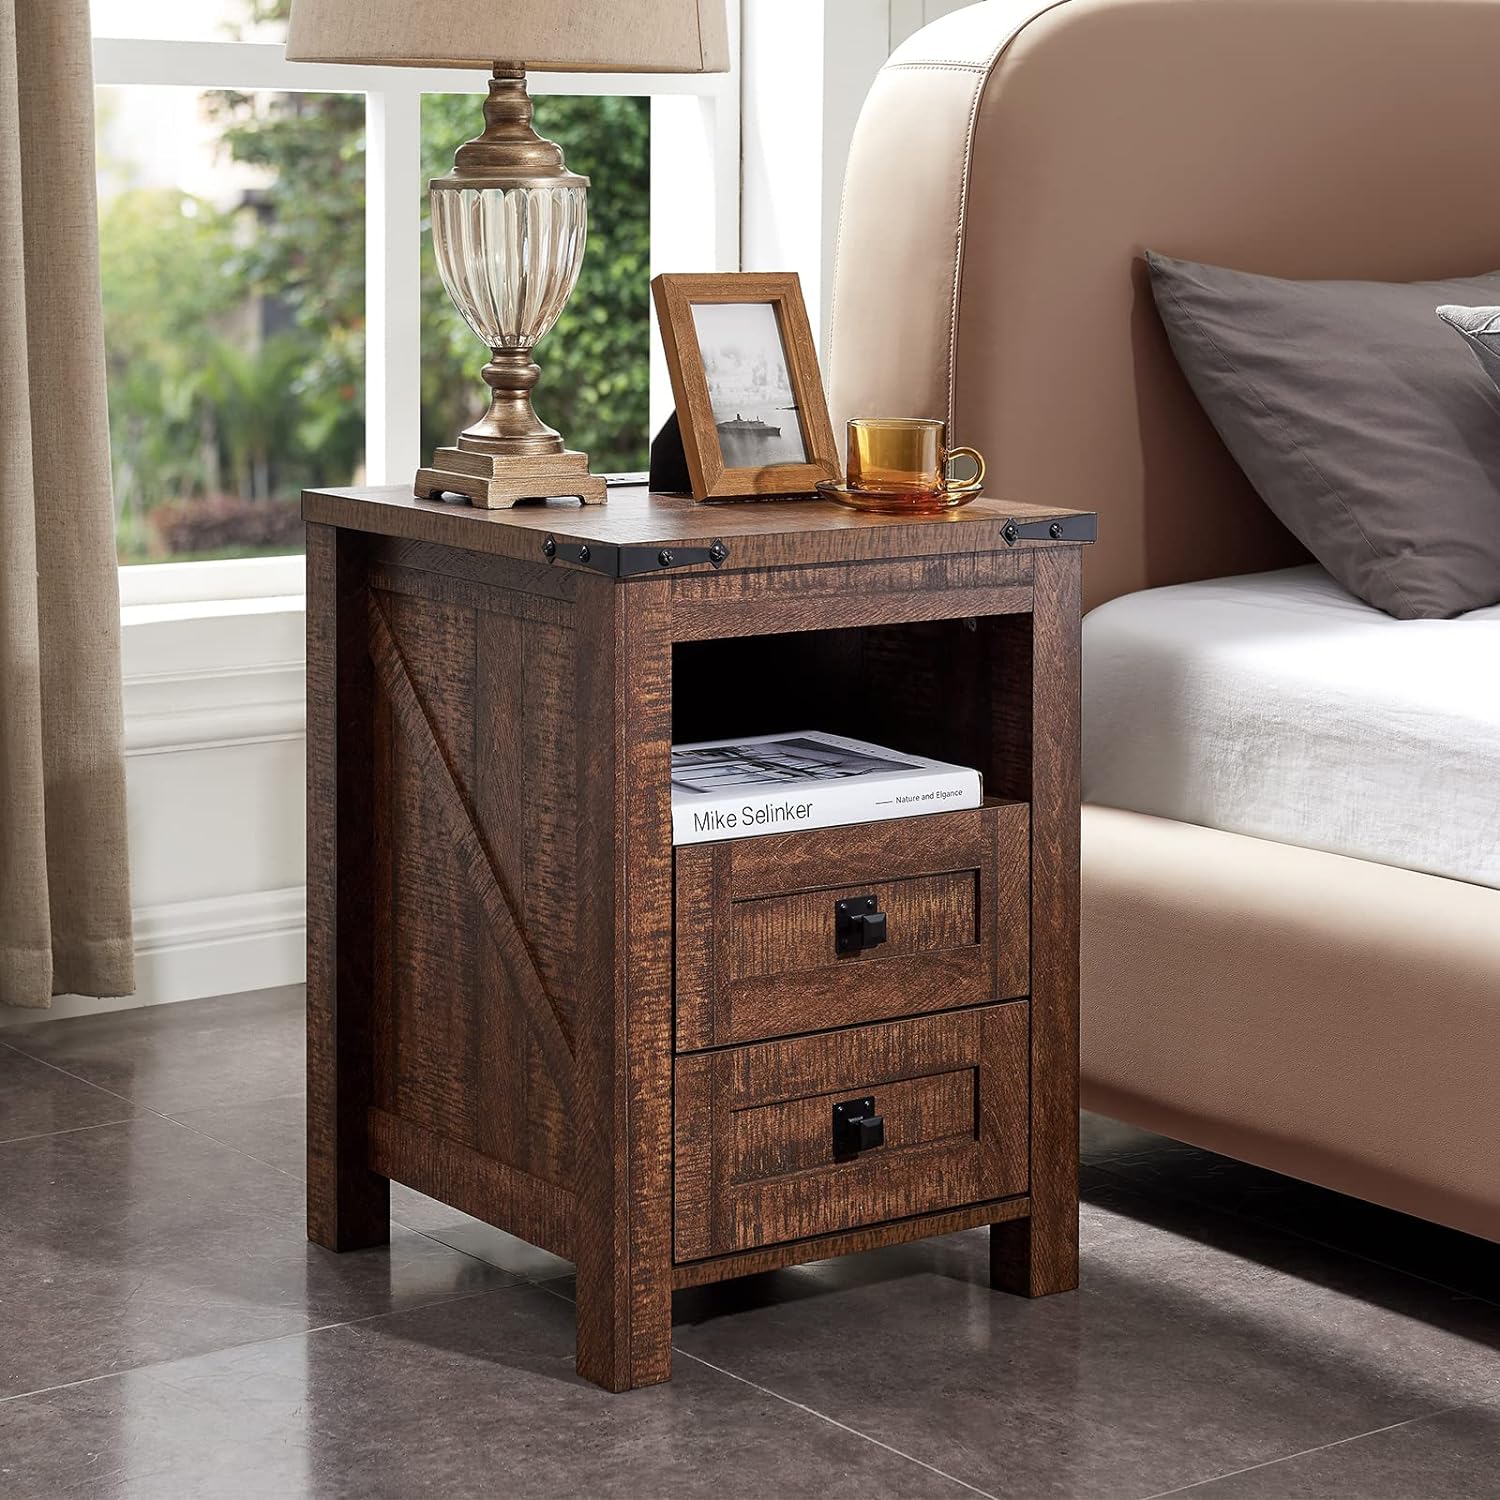 Save Big on T4TREAM Nightstand with Charging Station! Limited-Time Discount